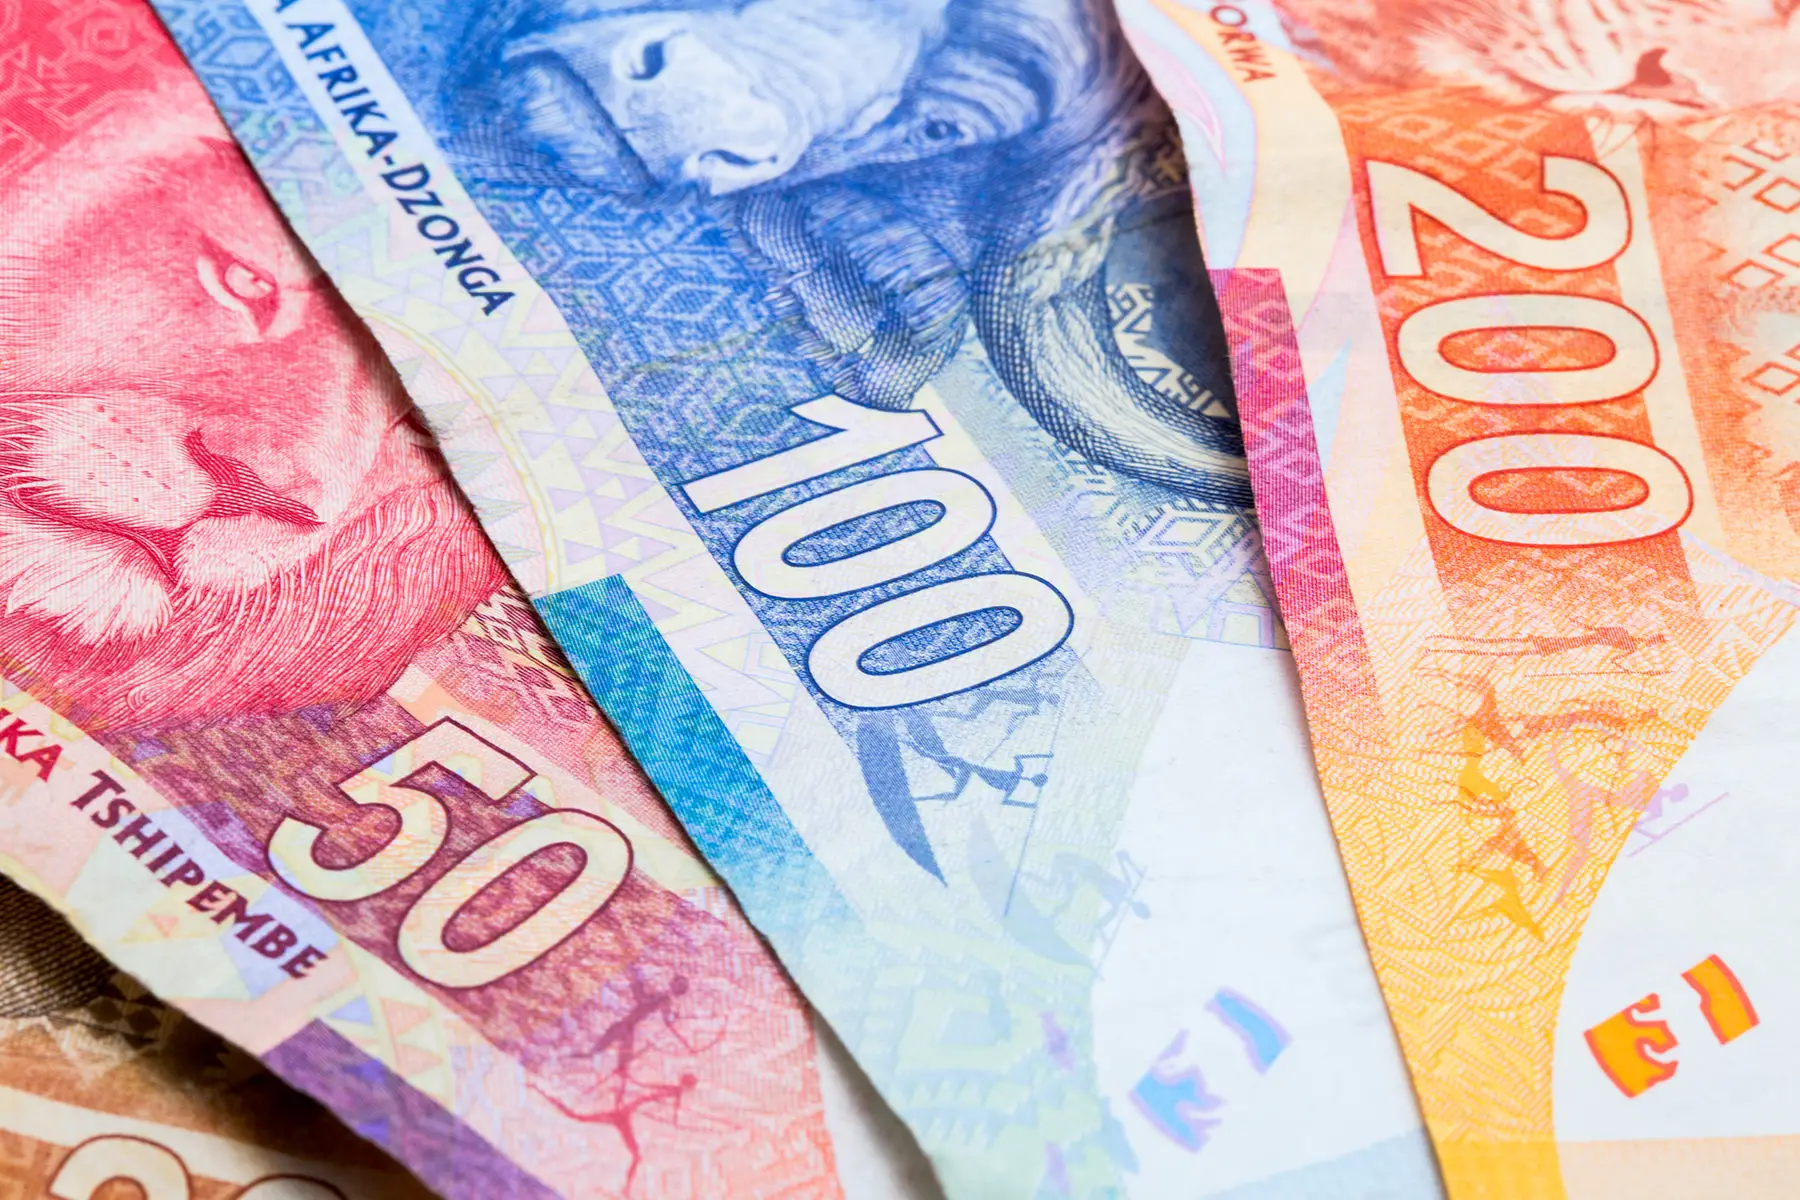 South African rand notes